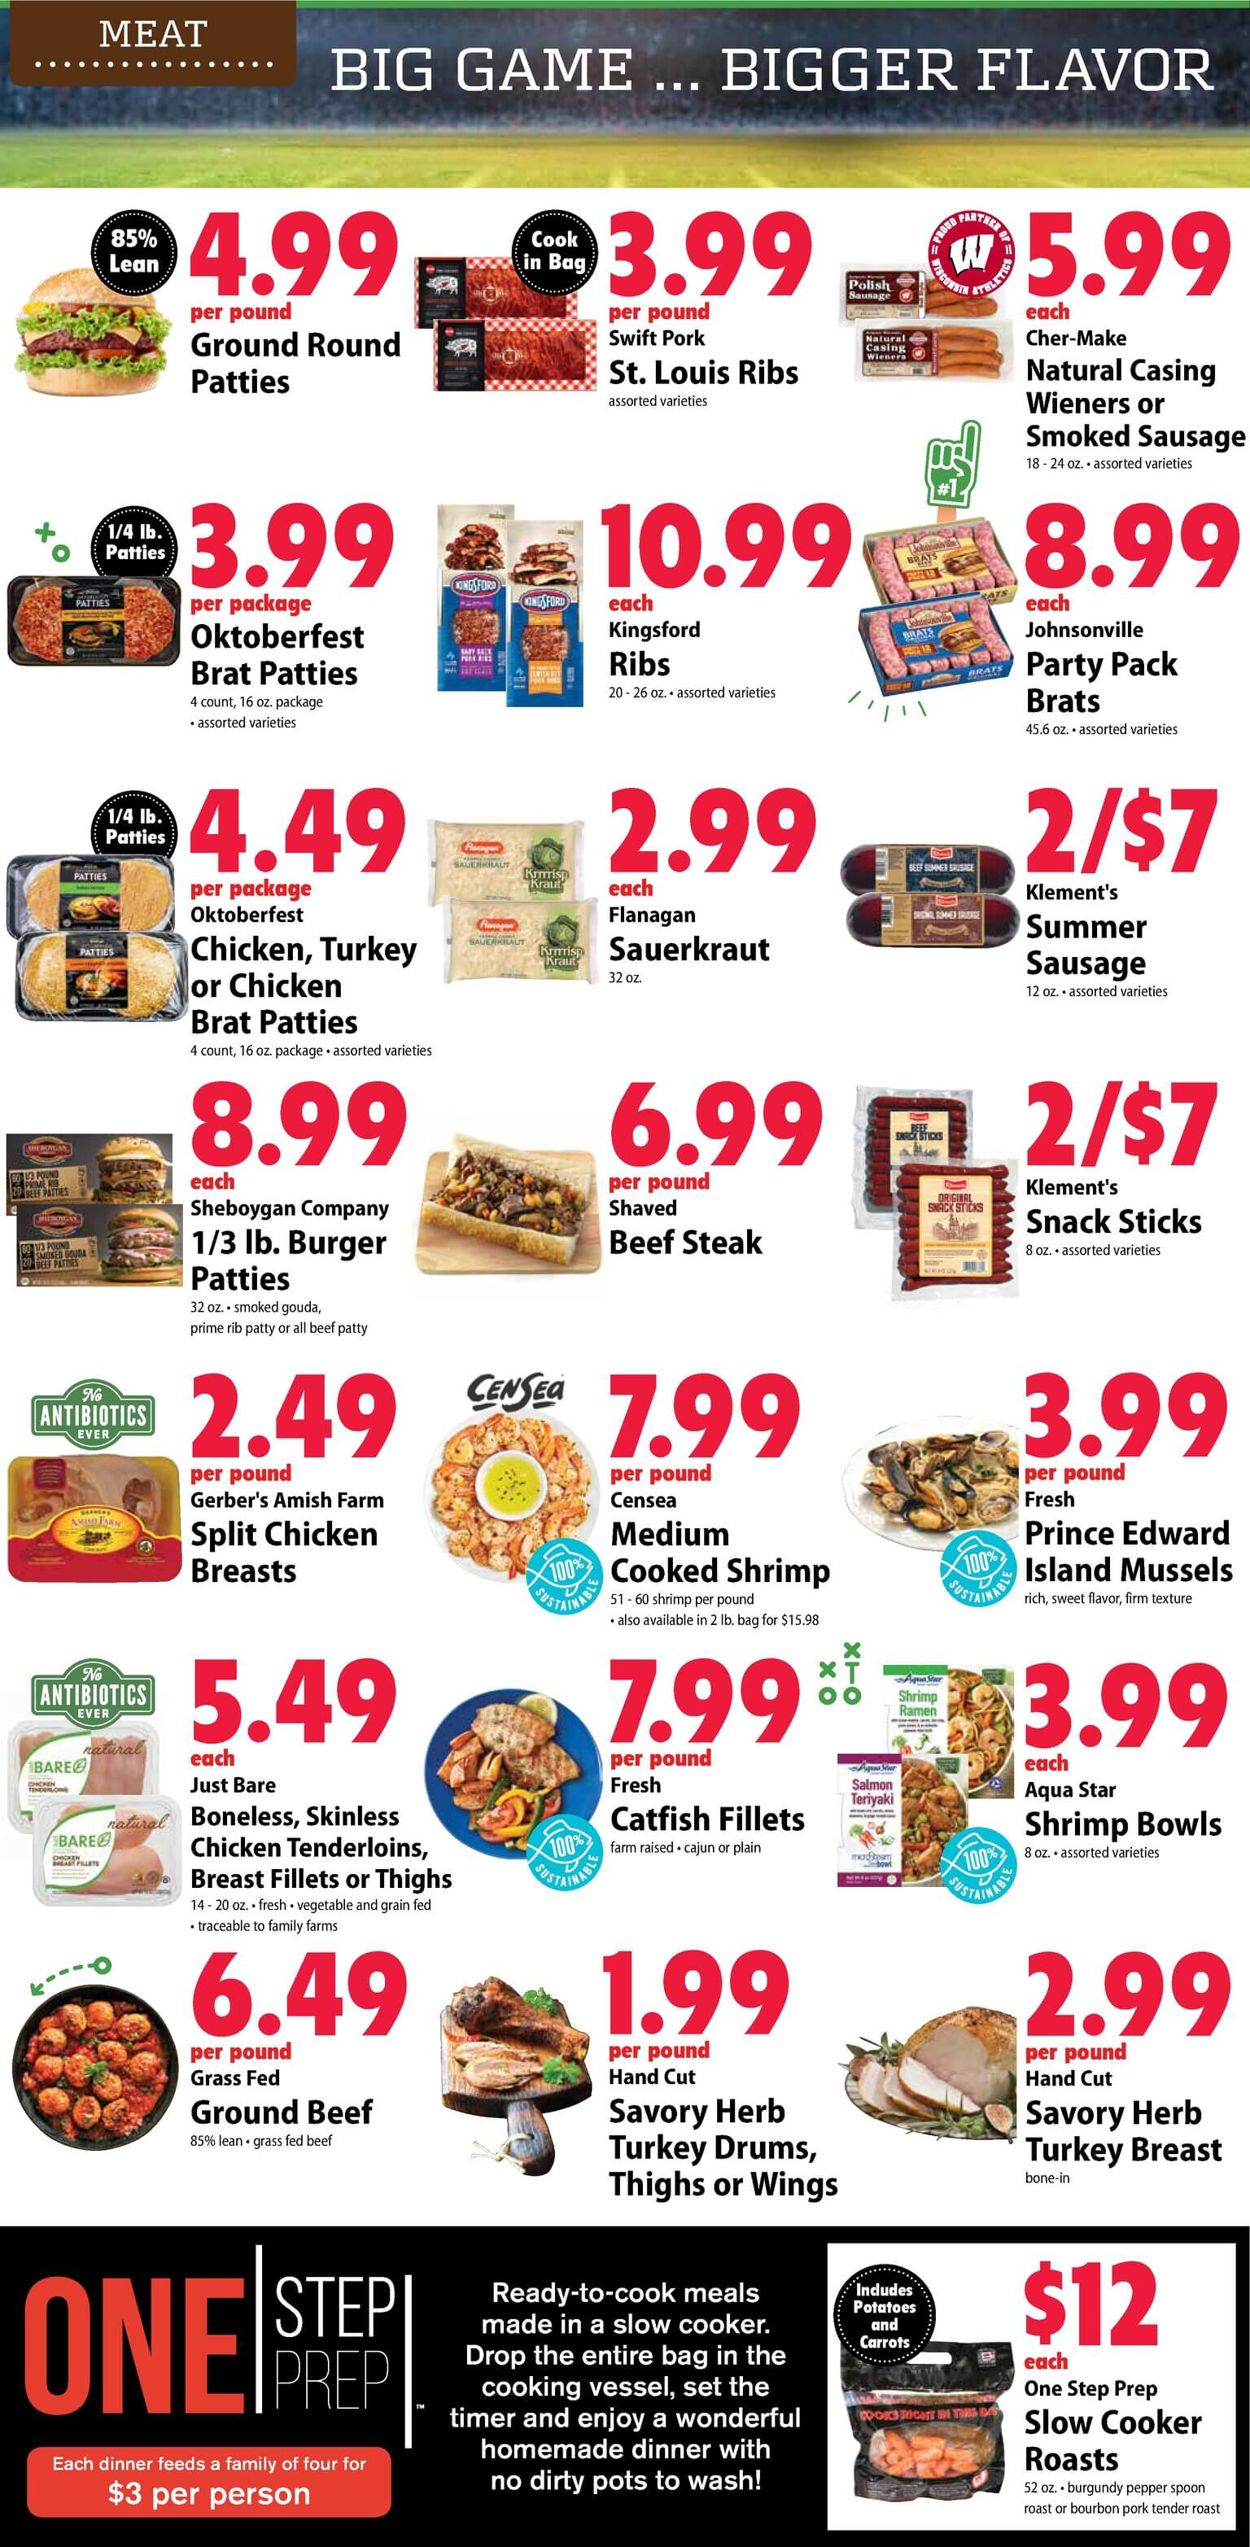 Festival Foods Current weekly ad 01/29 02/04/2020 [3]